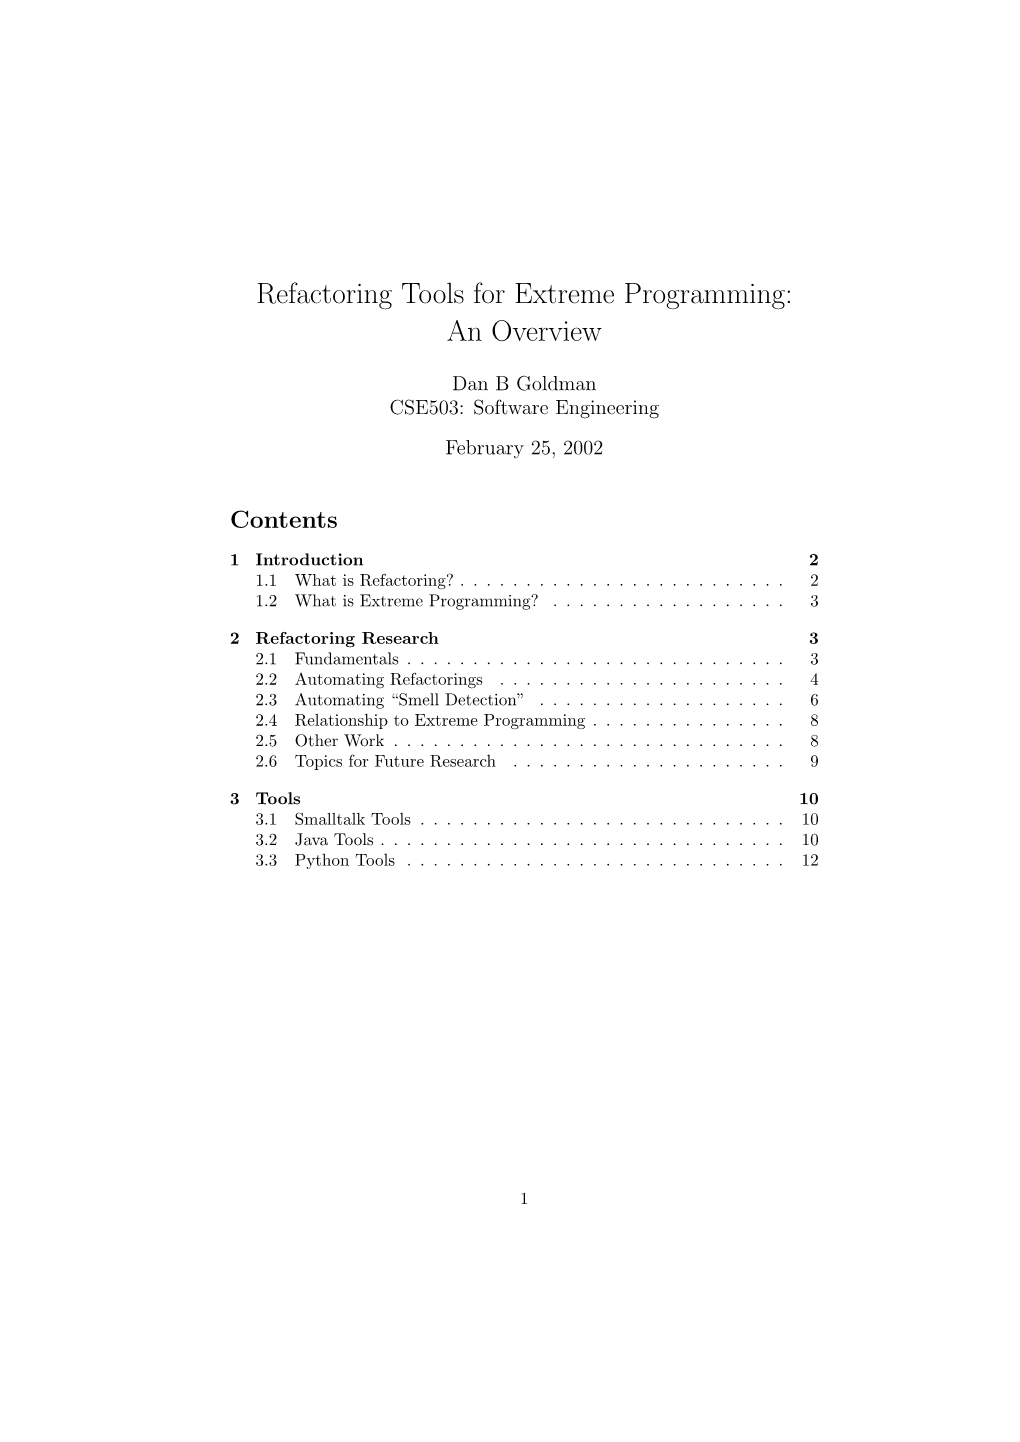 Refactoring Tools for Extreme Programming: an Overview